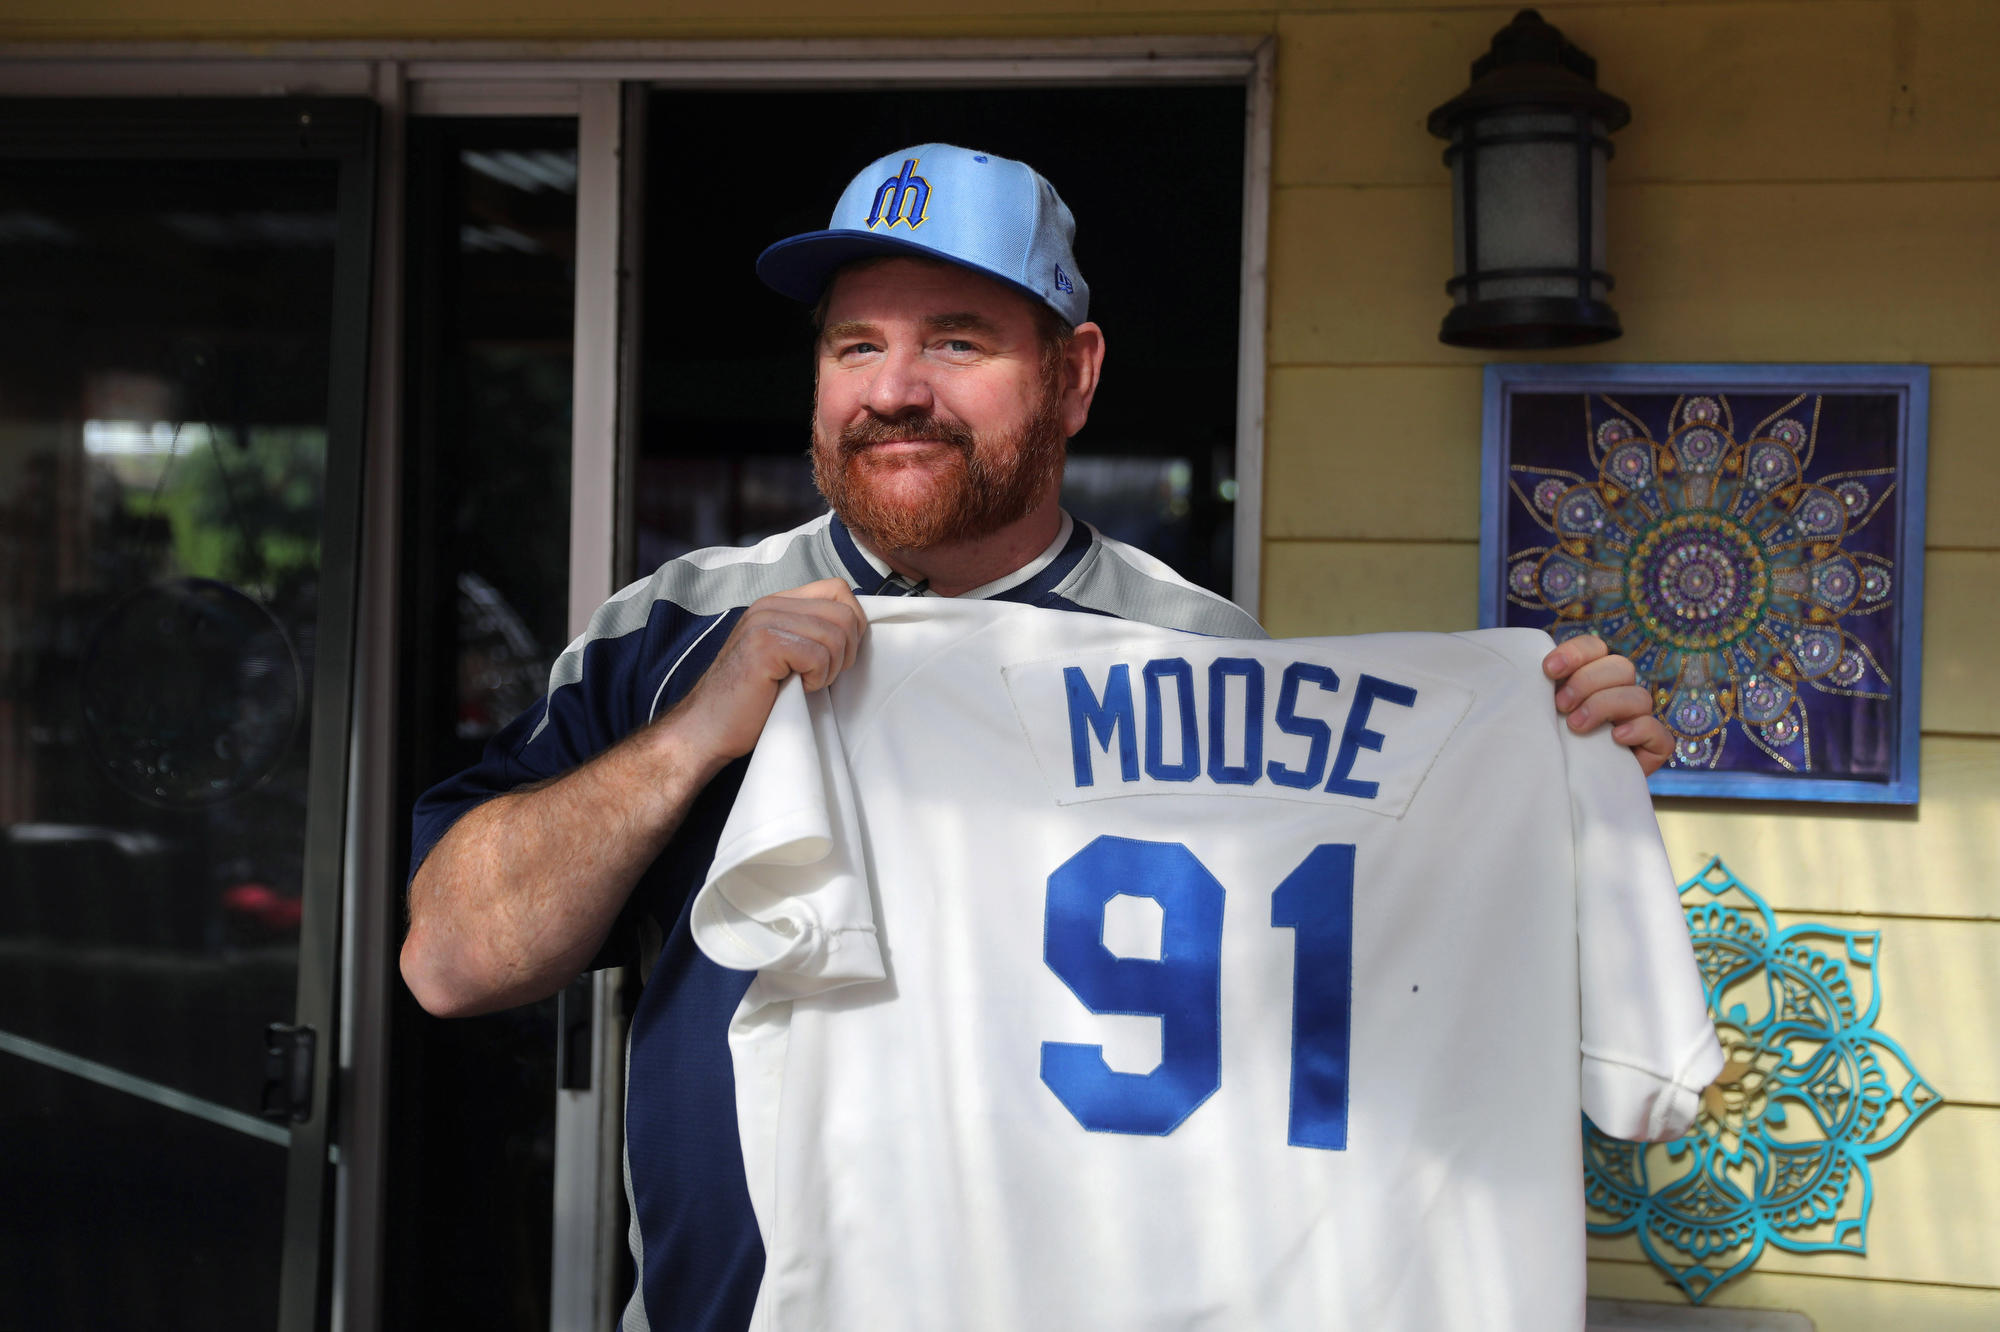 A man holds up a white baseball jersey with Moose 91 on the back